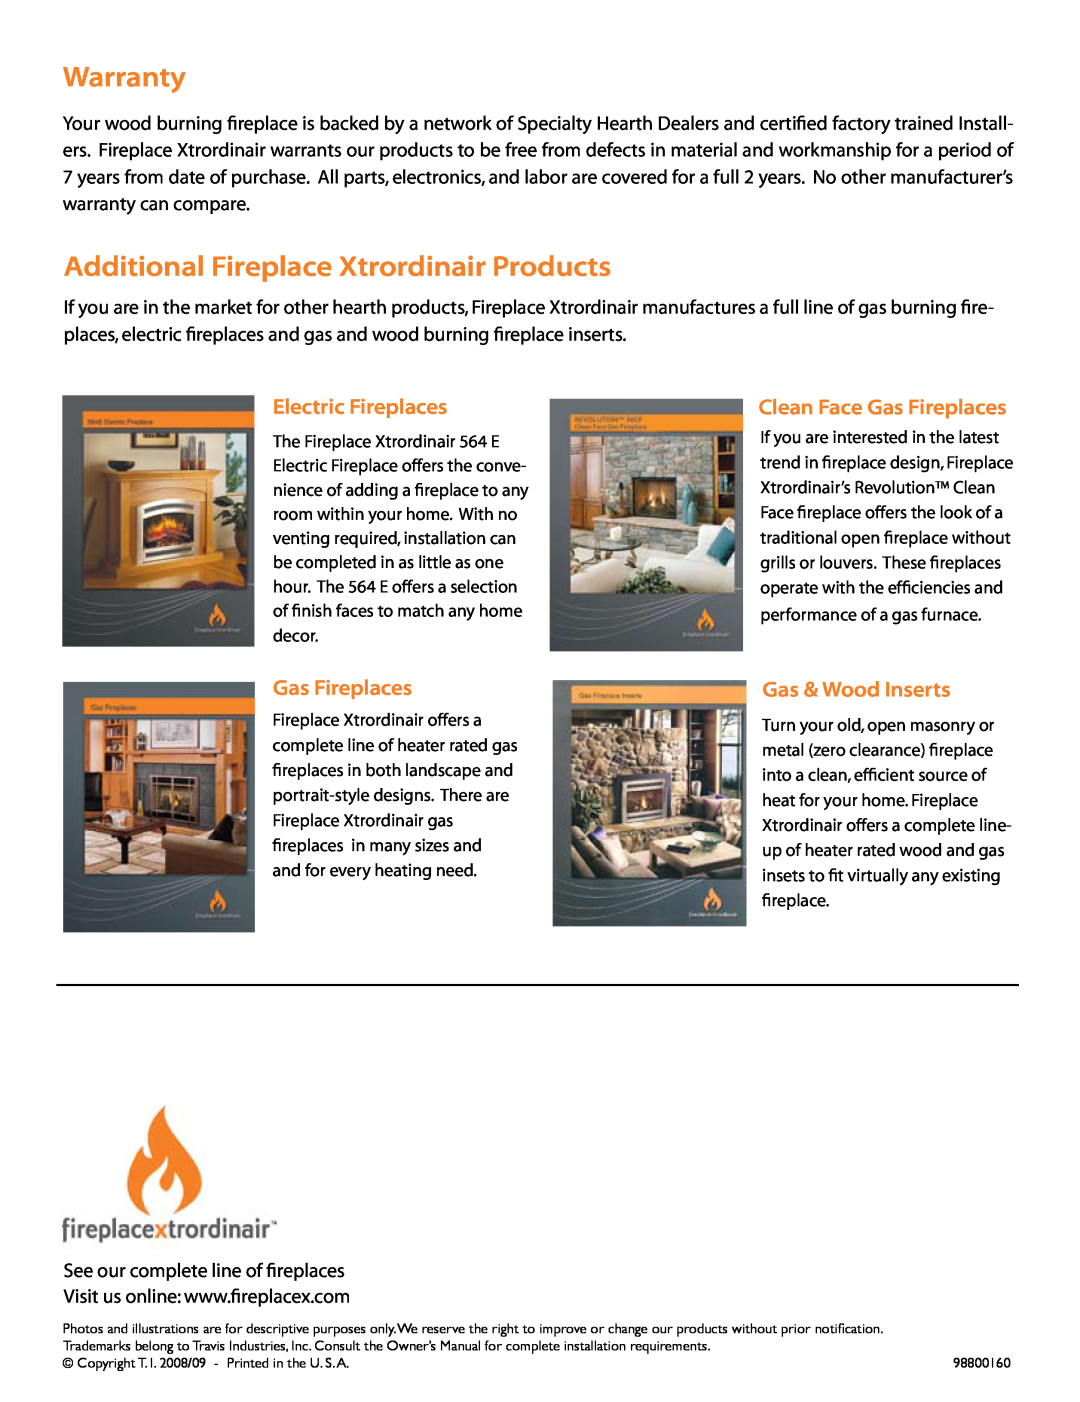 FireplaceXtrordinair FPX 44 manual Warranty, Additional Fireplace Xtrordinair Products, Electric Fireplaces, Gas Fireplaces 